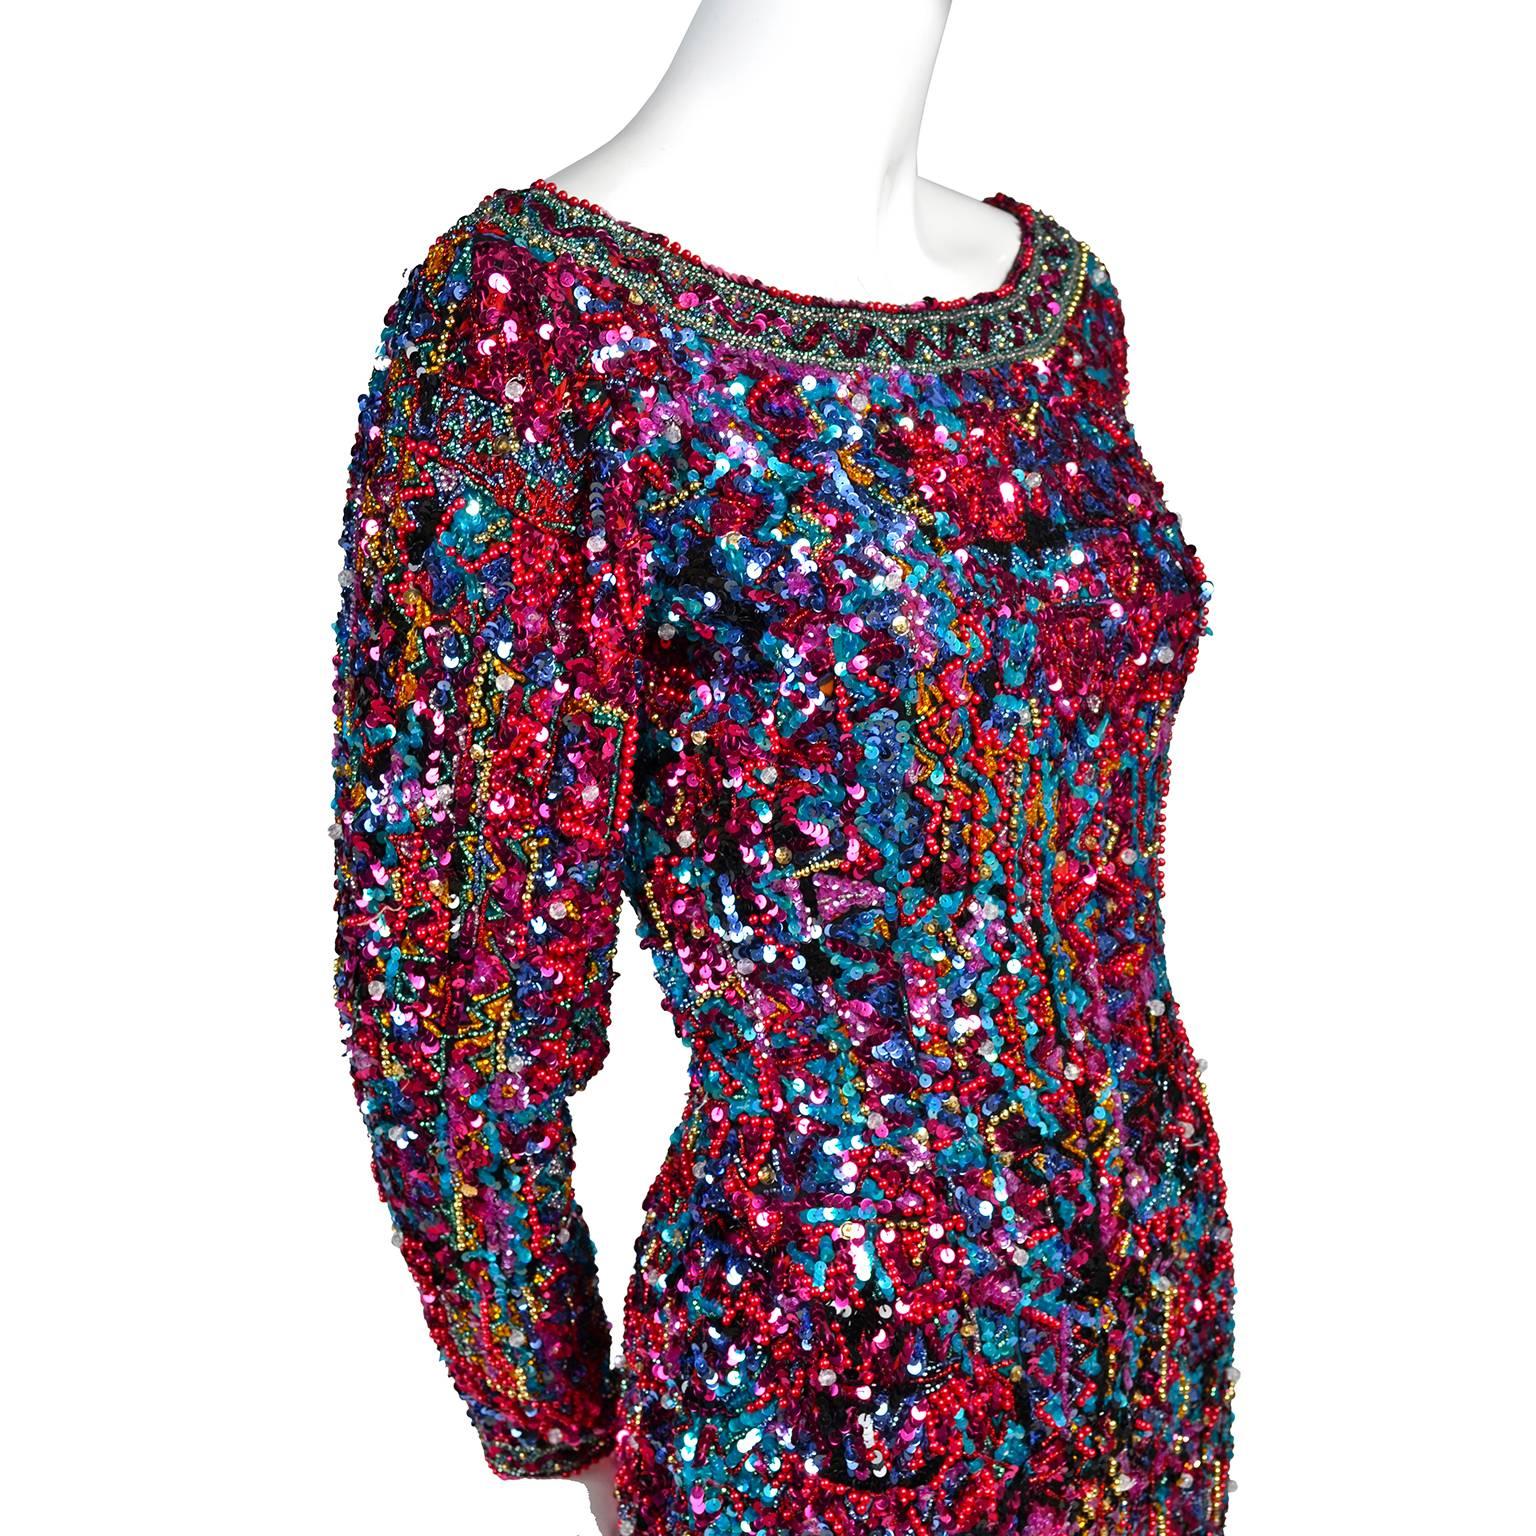 This is a stunning 1980's vintage Oleg Cassini black tie dress that is covered in colorful beads and sequins.  This beautiful red, blue, green and pink dress is silk with rayon lining and is labeled a size 6.  We estimate it to fit a modern day size